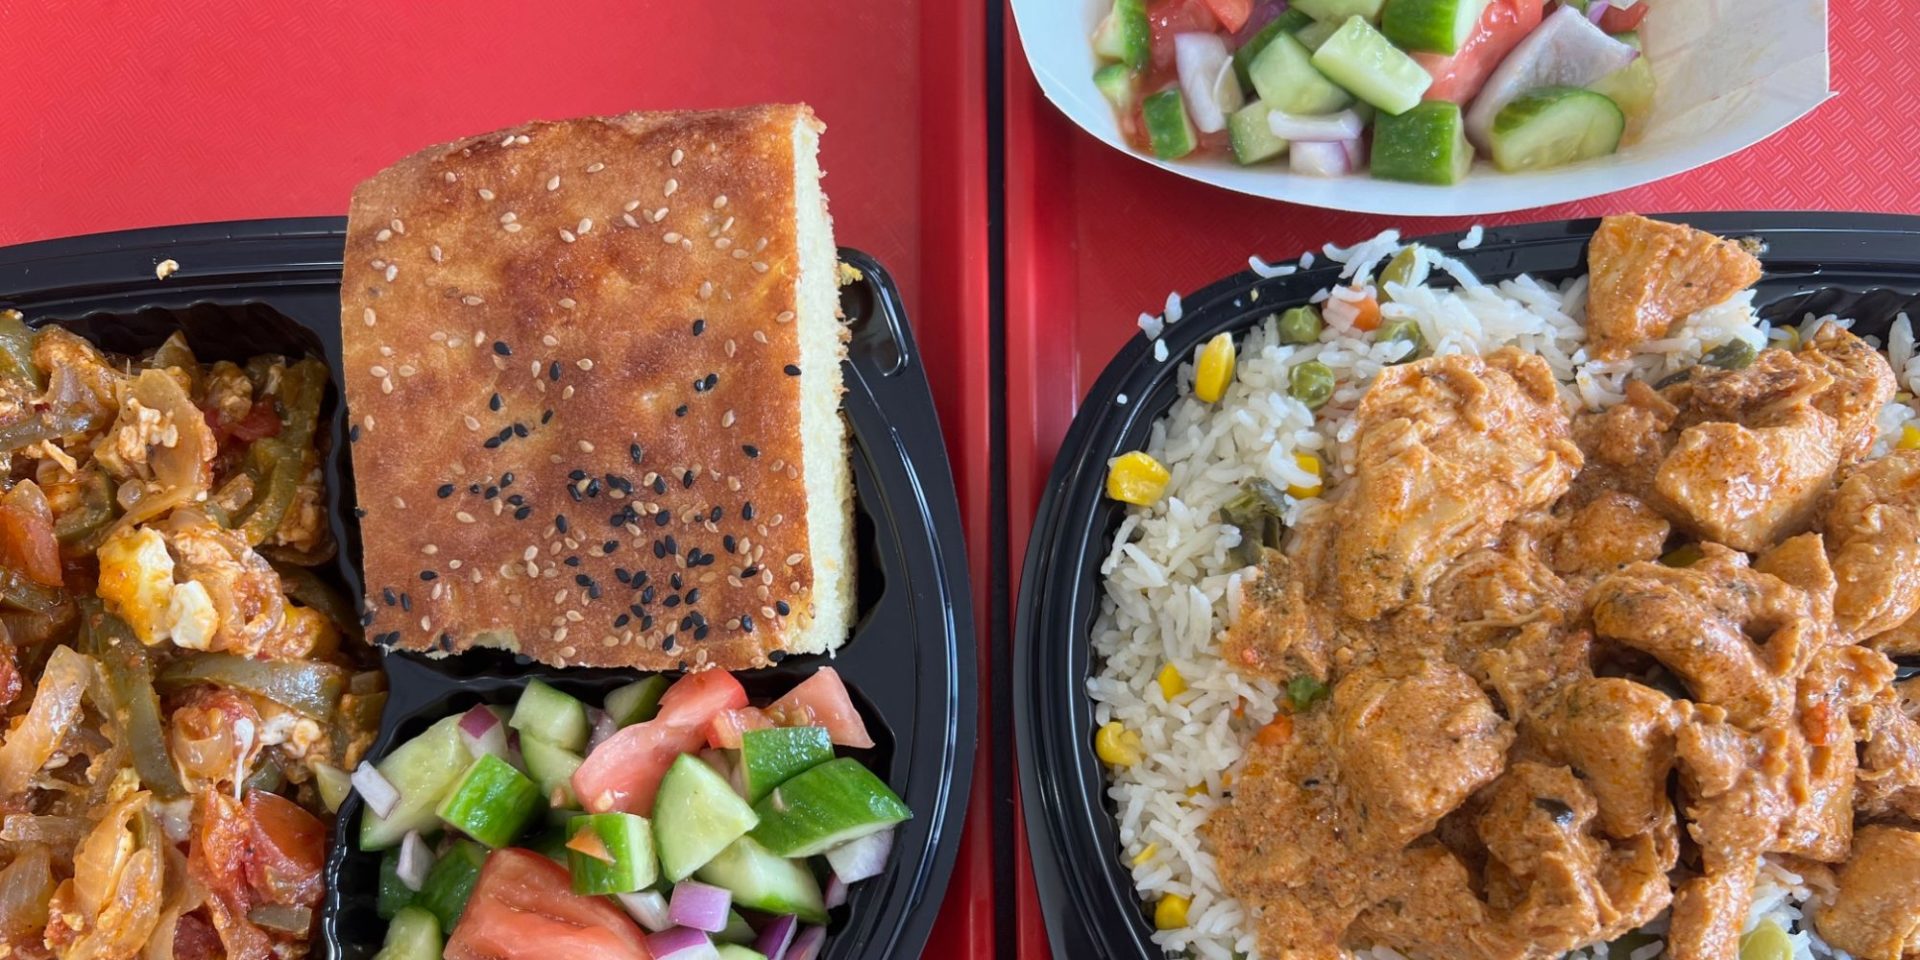 On two red trays, two black plastic compartment-takeout containers have North African Cuisine: shakshouka with salad and bread, the other rice with vegetables topped with sauced chicken.